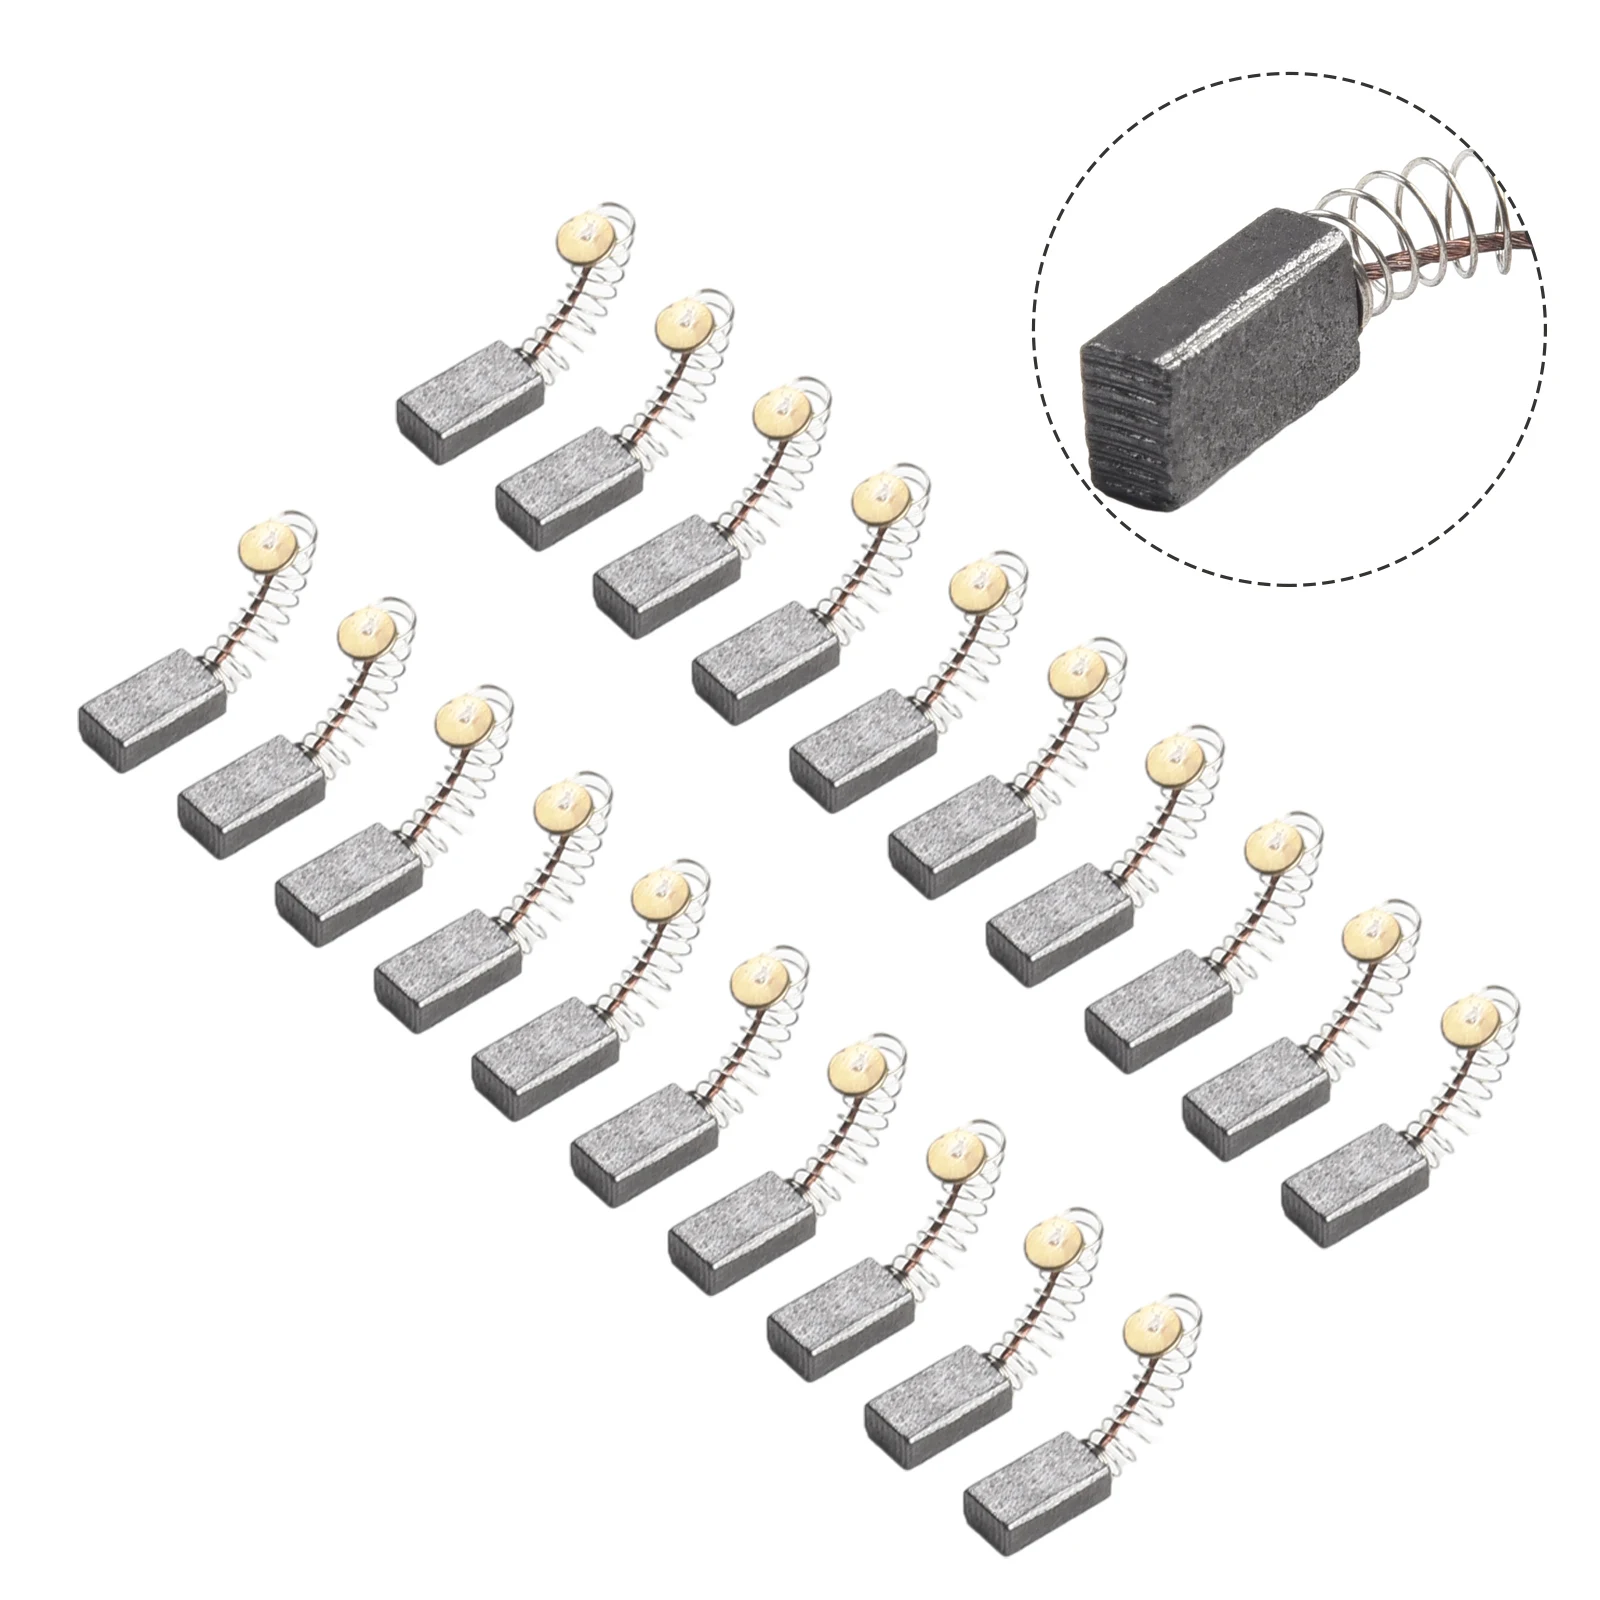 20pcs Electric Drill Motor Carbon Brush Replacement Part For Bo-Sch Angle Grinder 5x8x15mm Power Tool Accessories